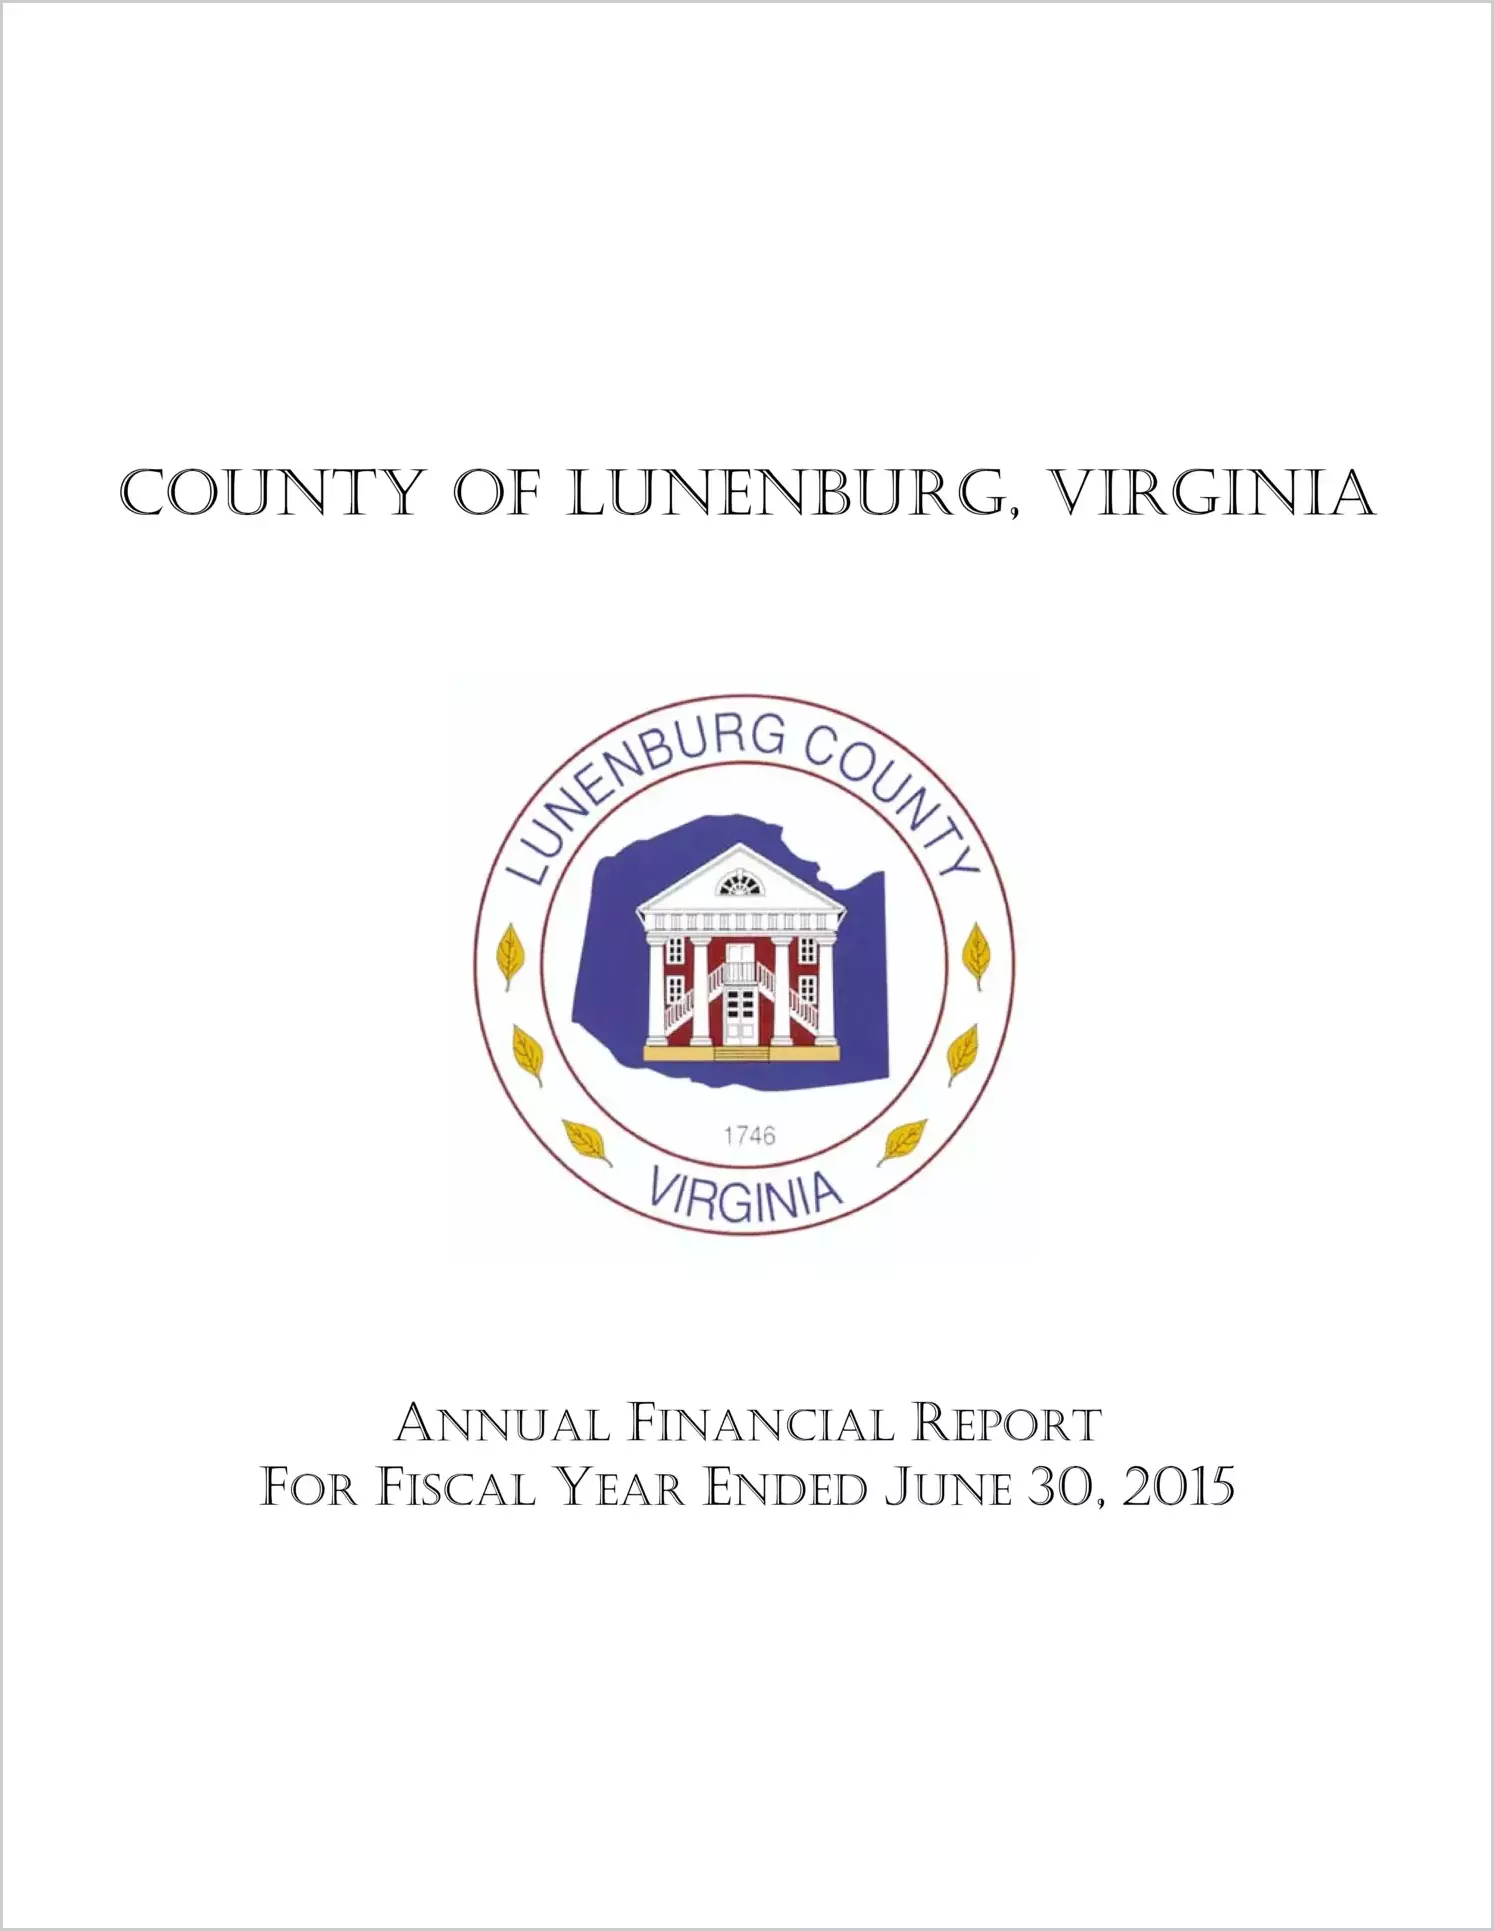 2015 Annual Financial Report for County of Lunenburg